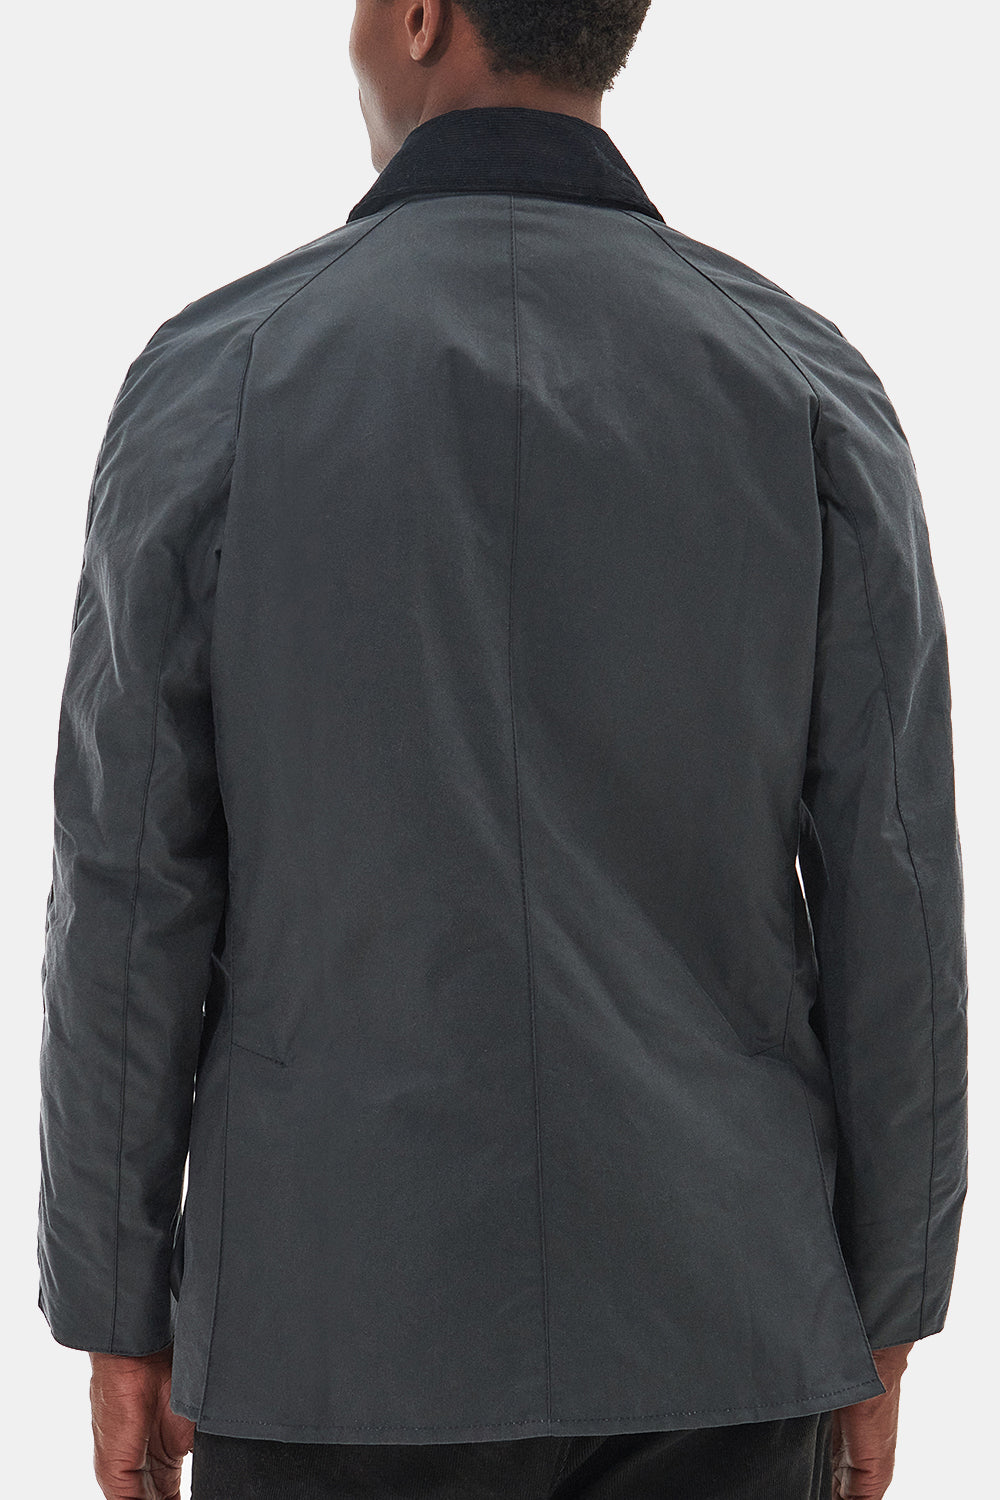 Barbour Ashby Waxed Jacket (Grey/Classic)